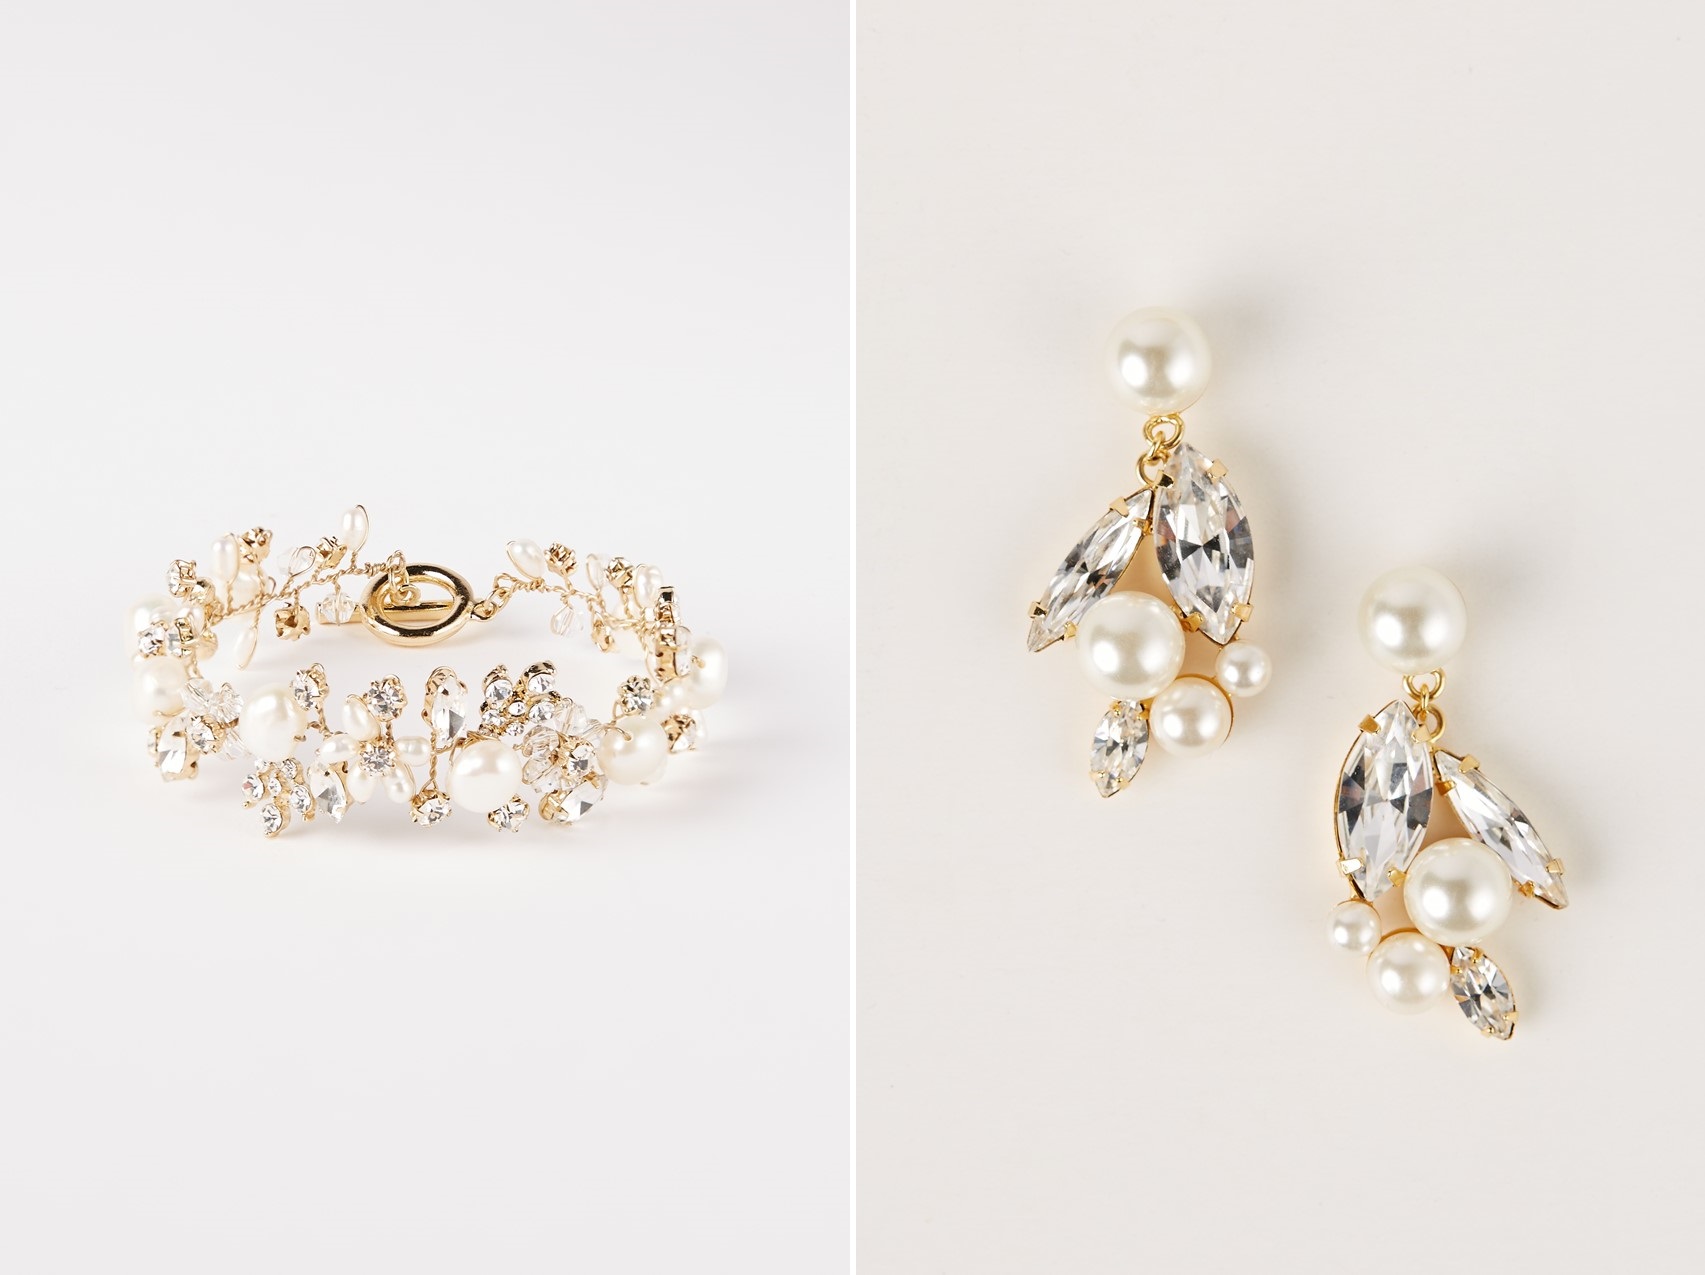 Perle Bracelet & Portia Earrings from BHLDN's Stunning Fall 2015 Collection ‘Twice Enchanted’